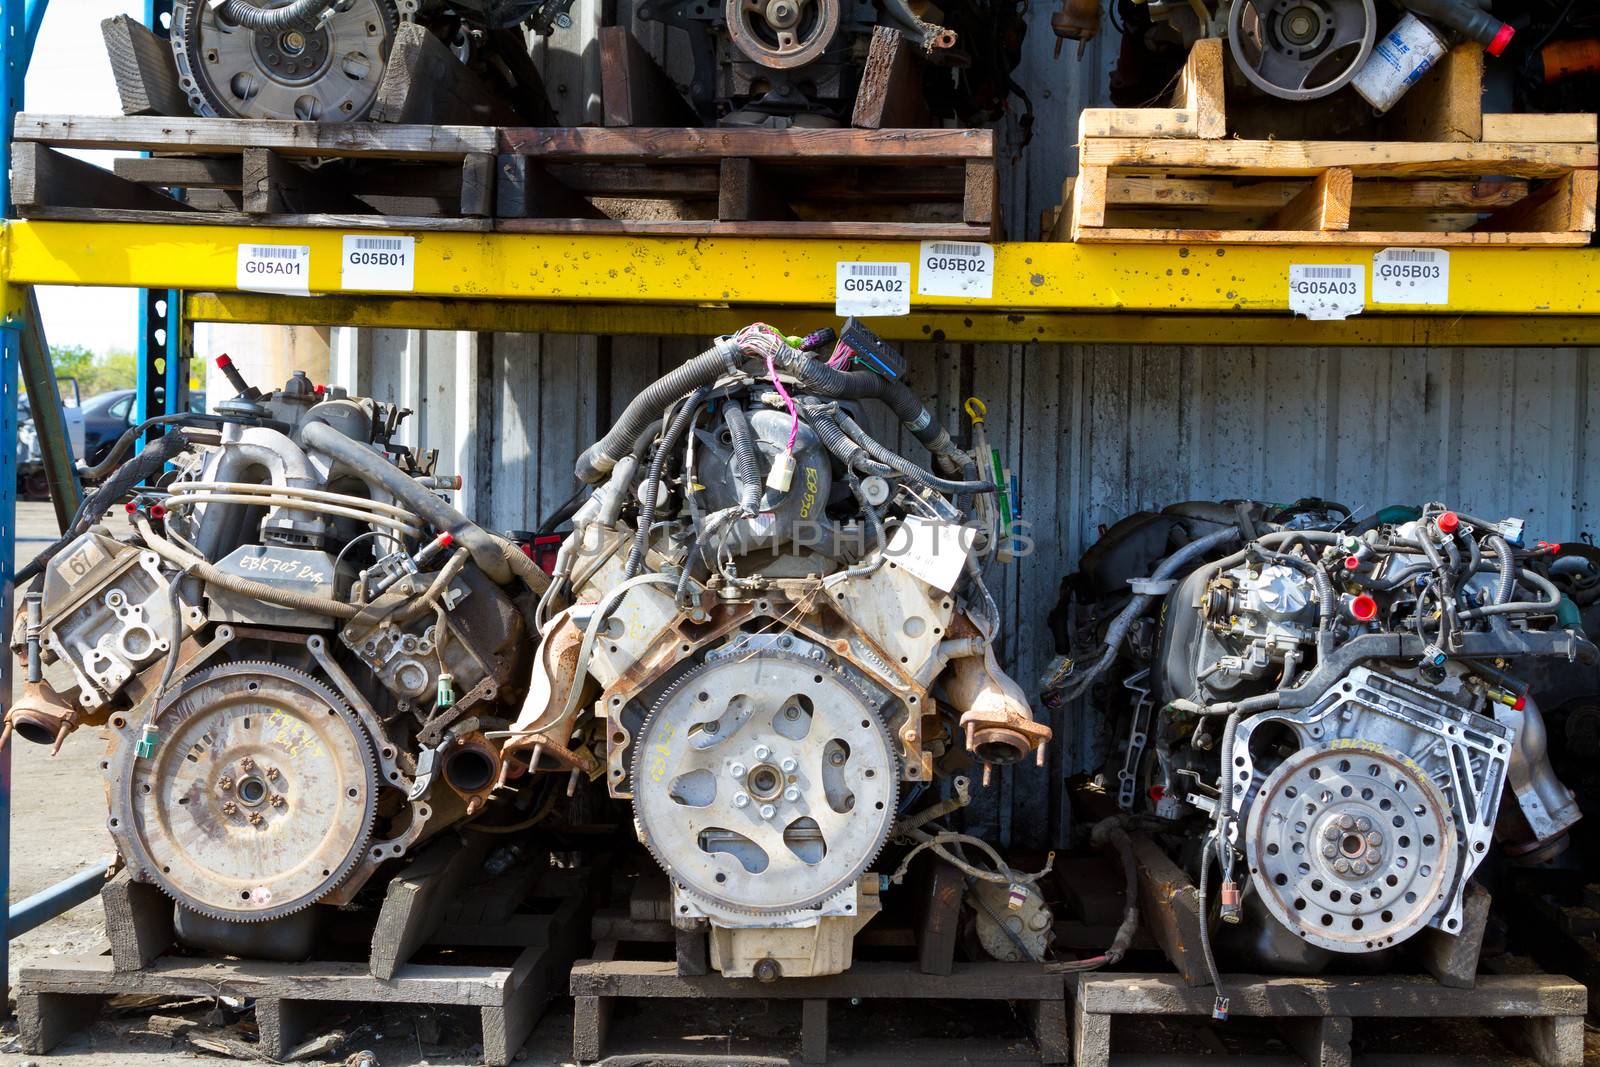 Car and truck engine block motors are lined up at an automobile salvage yard junkyard.